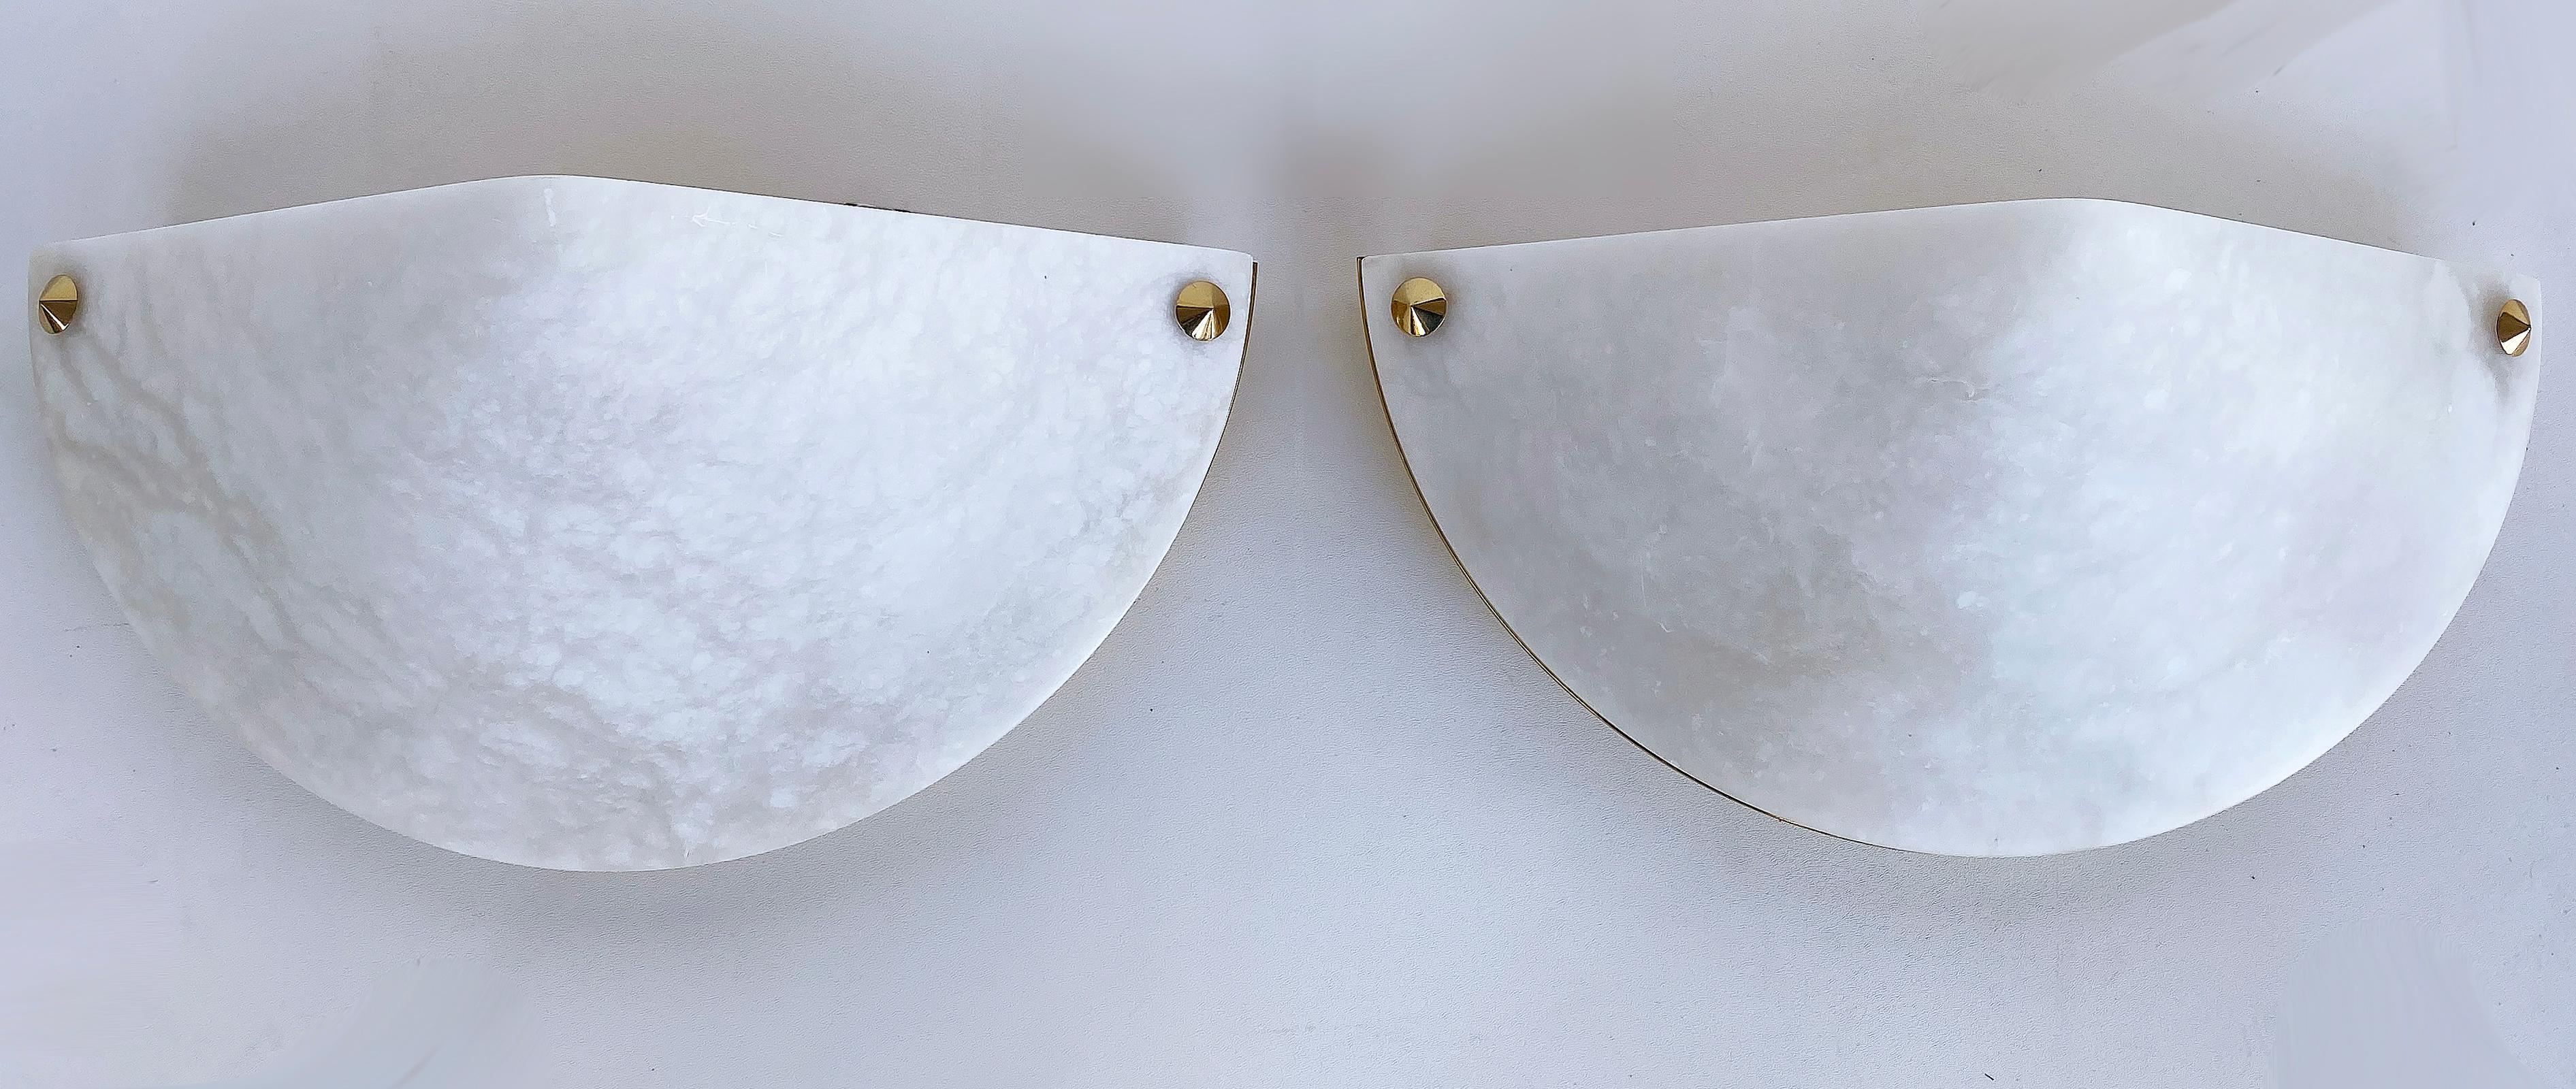 Vintage Lightolier Alabaster and brass wall sconces, a Pair

Offered for sale is a 1980s vintage pair of Lightolier alabaster and brass wall sconces. The sconces are made in Spain and are wall-mounted on a frame with brass accent trim. They are